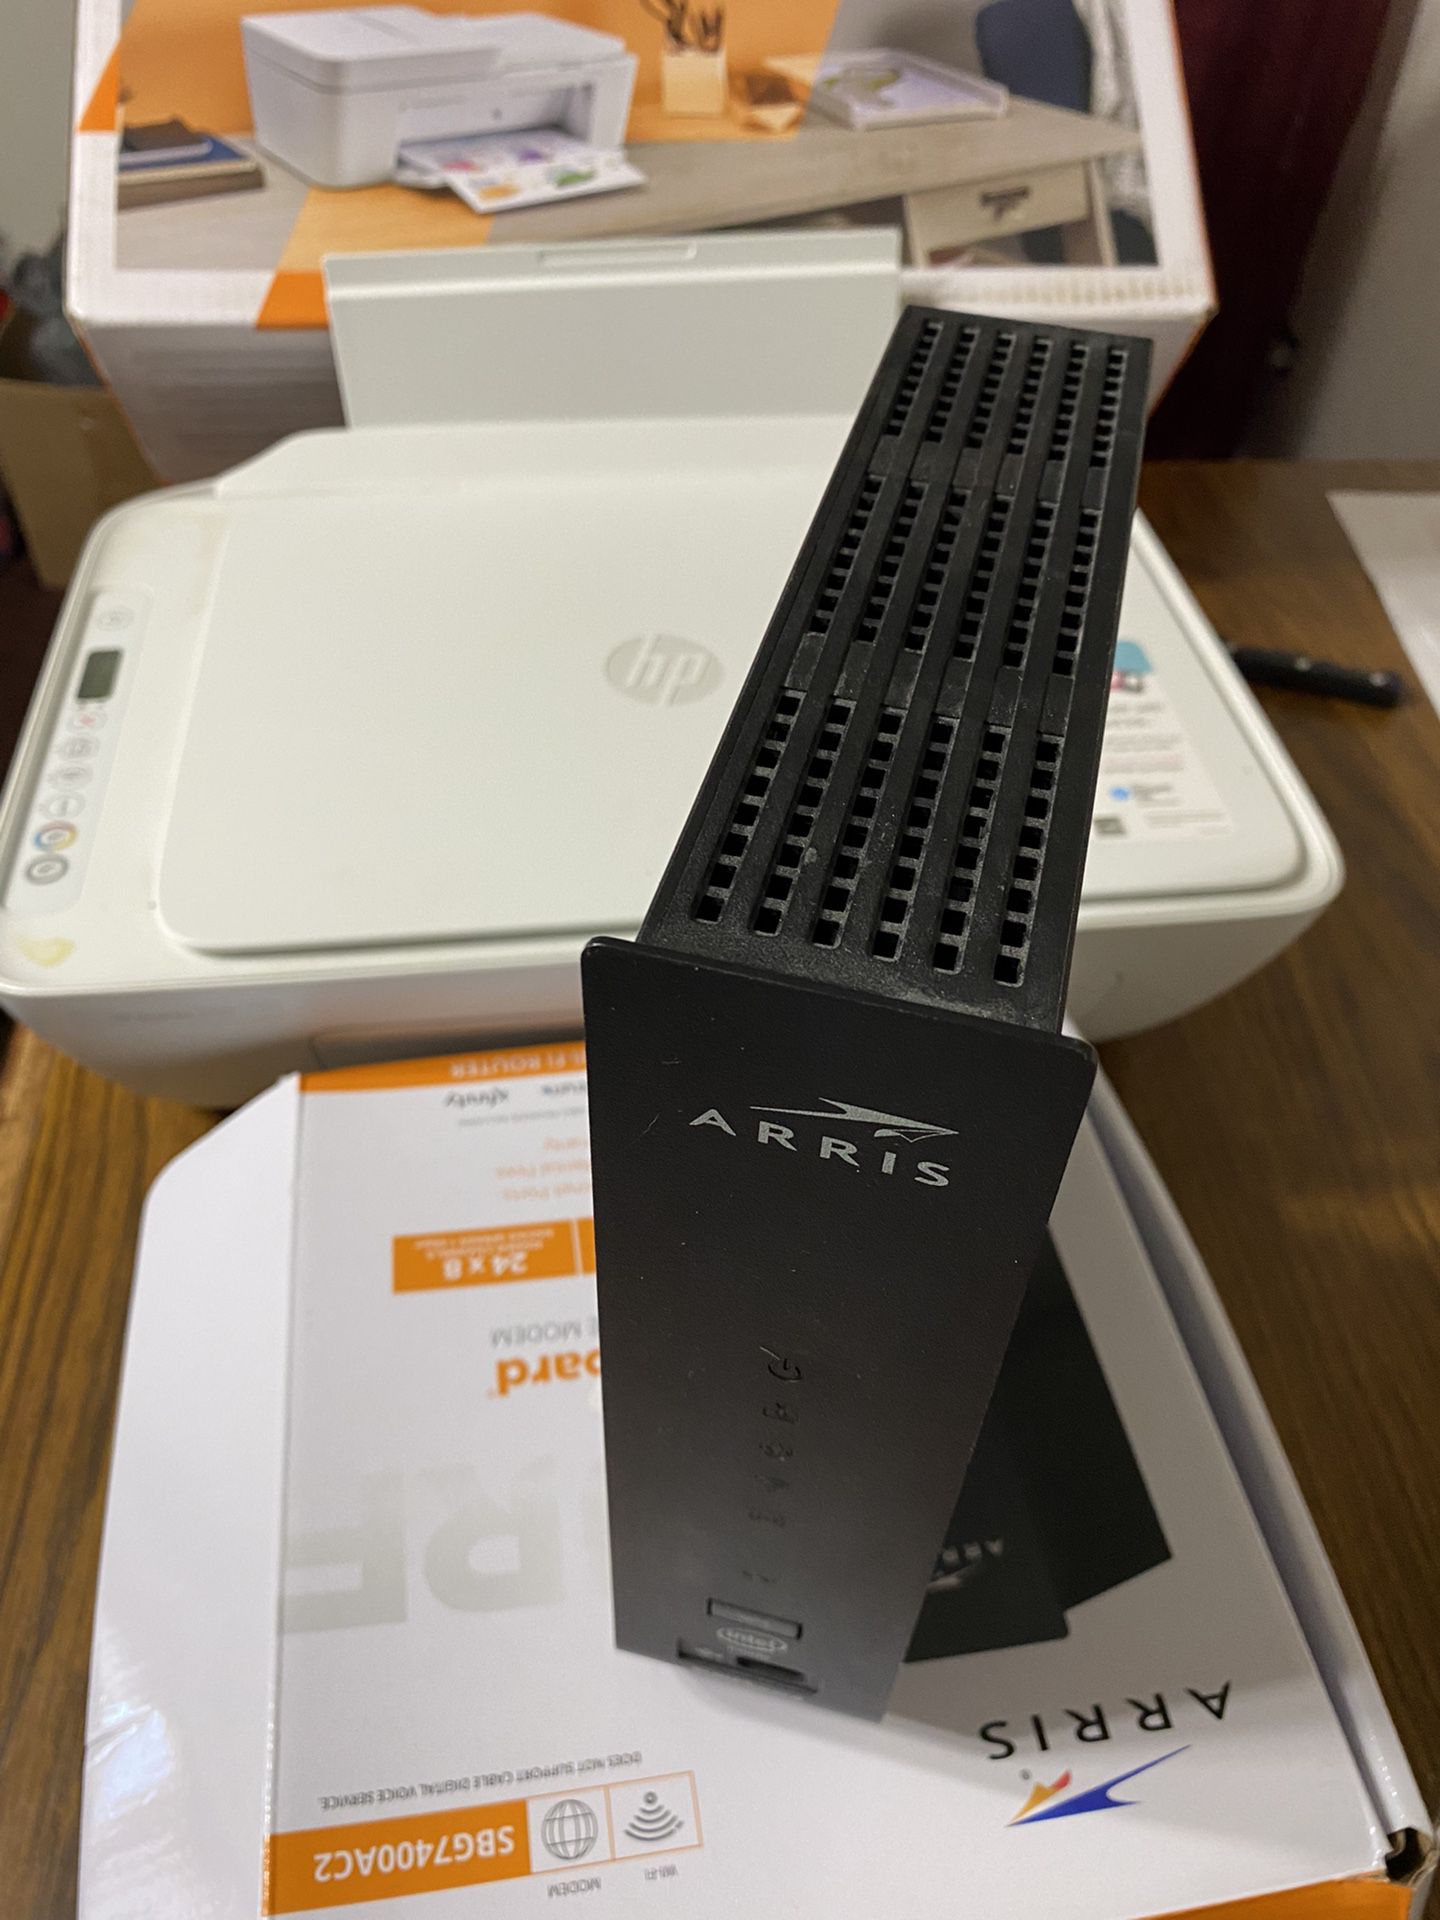 HP Copier Scanner Printer And Arris Router/Modem 